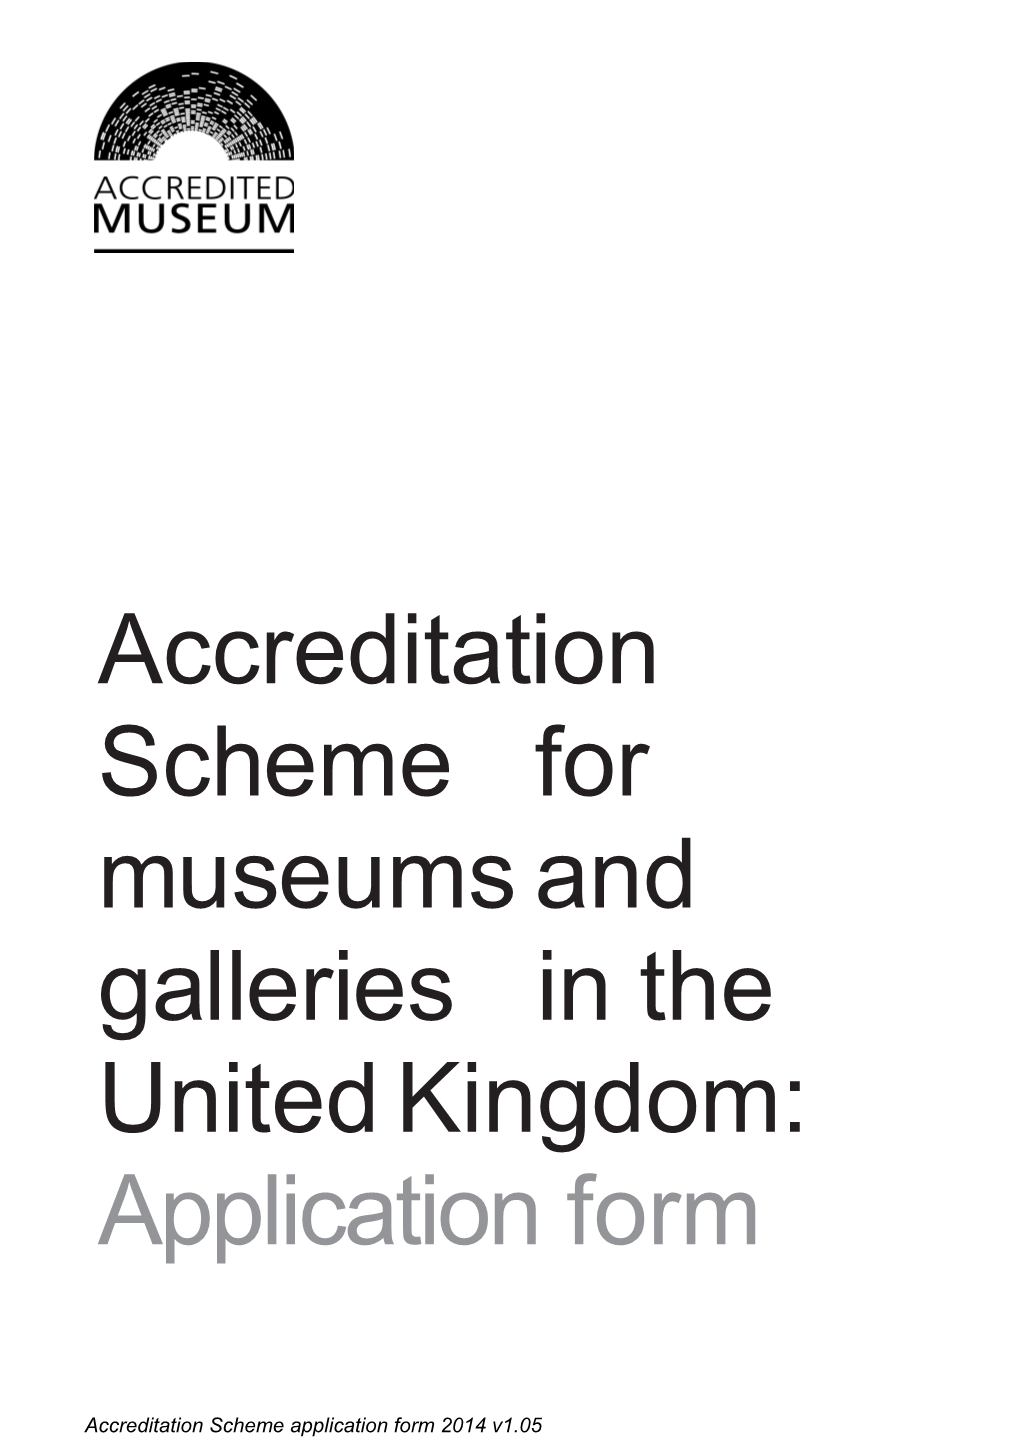 Schemefor Museums and Galleries in the United Kingdom: Application Form